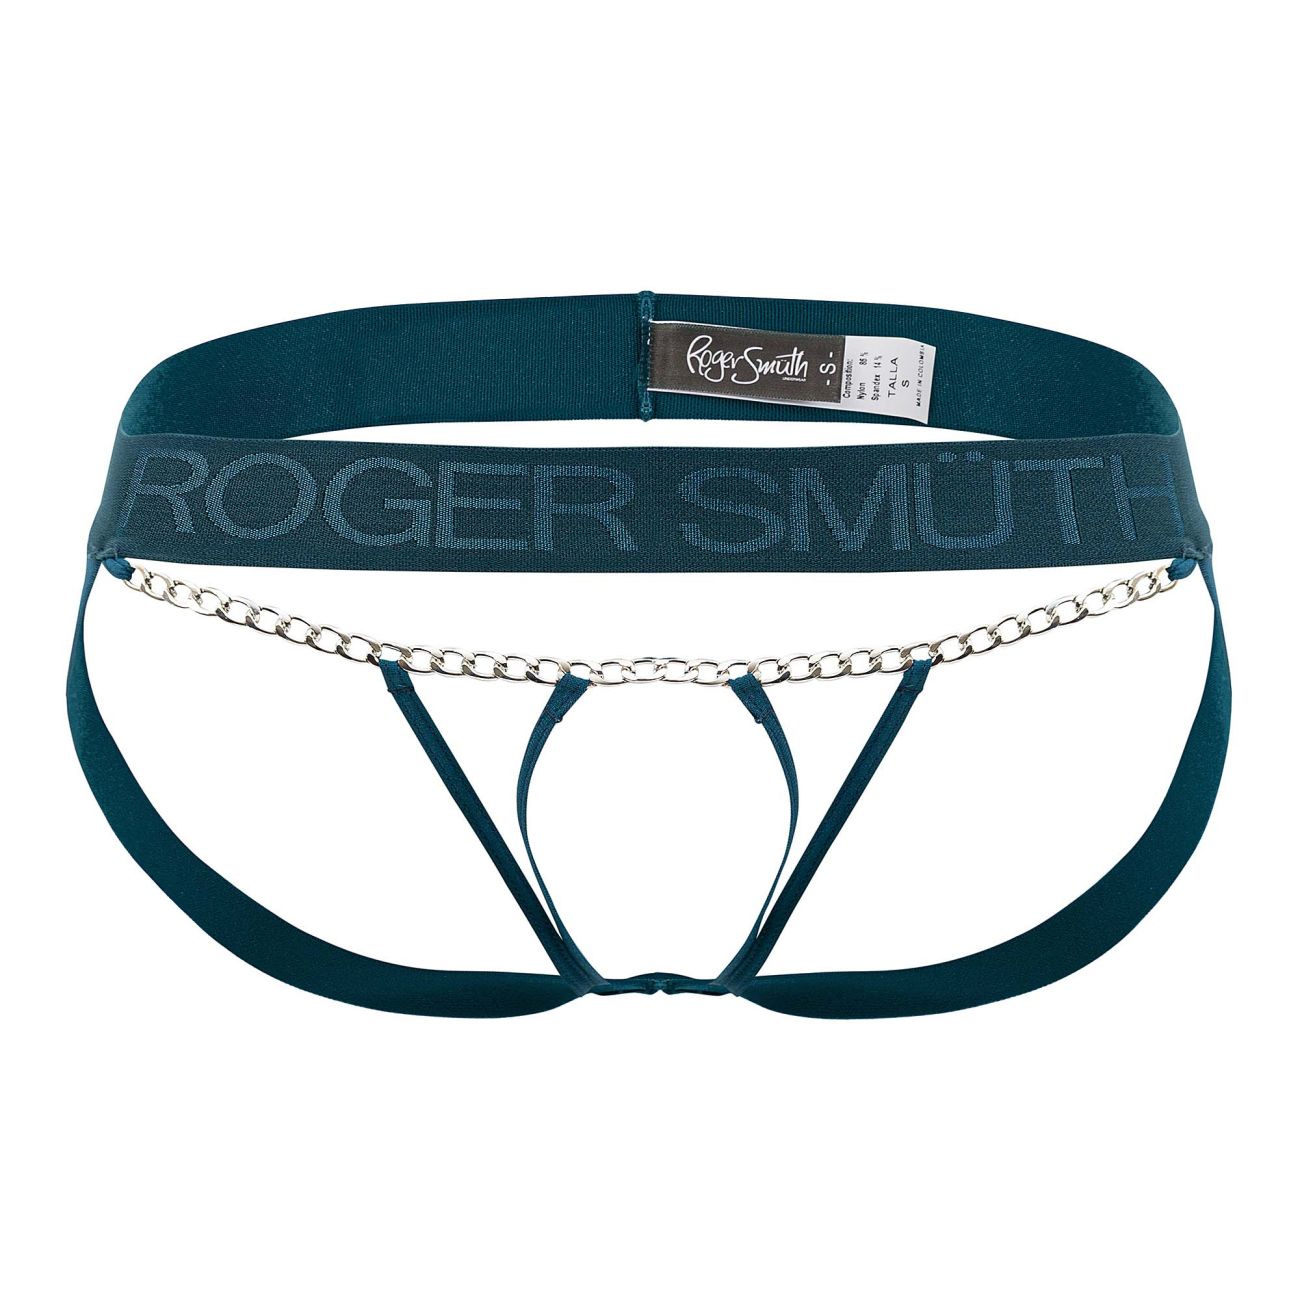 Roger Smuth RS086 Jock-Thong Green